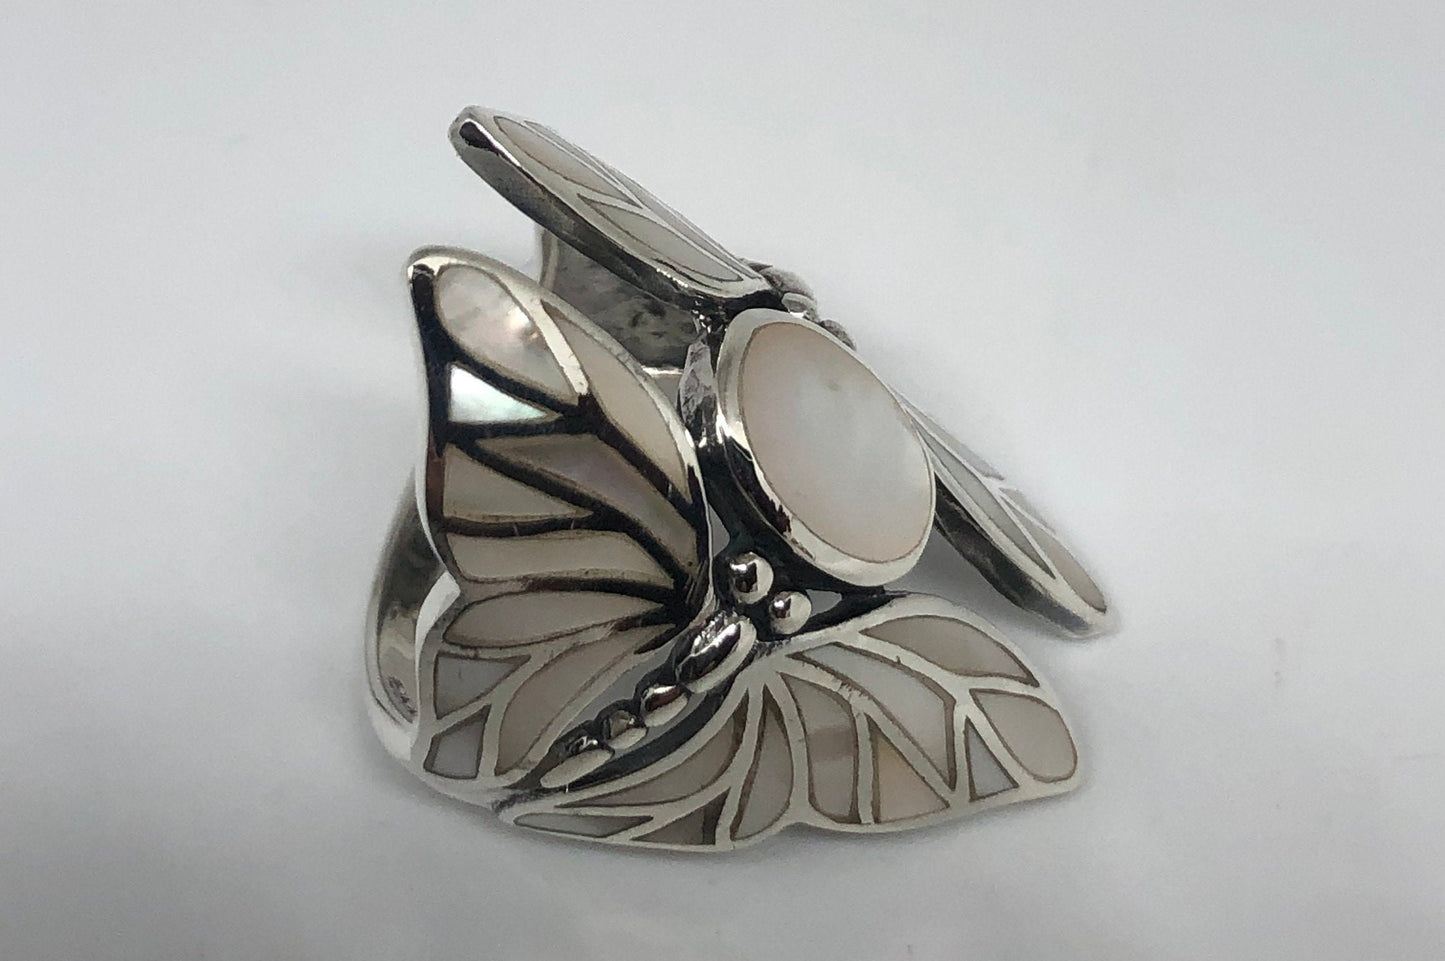 Antique Deco Mother of Pearl Lunar Moth 925 Sterling Silver Ring